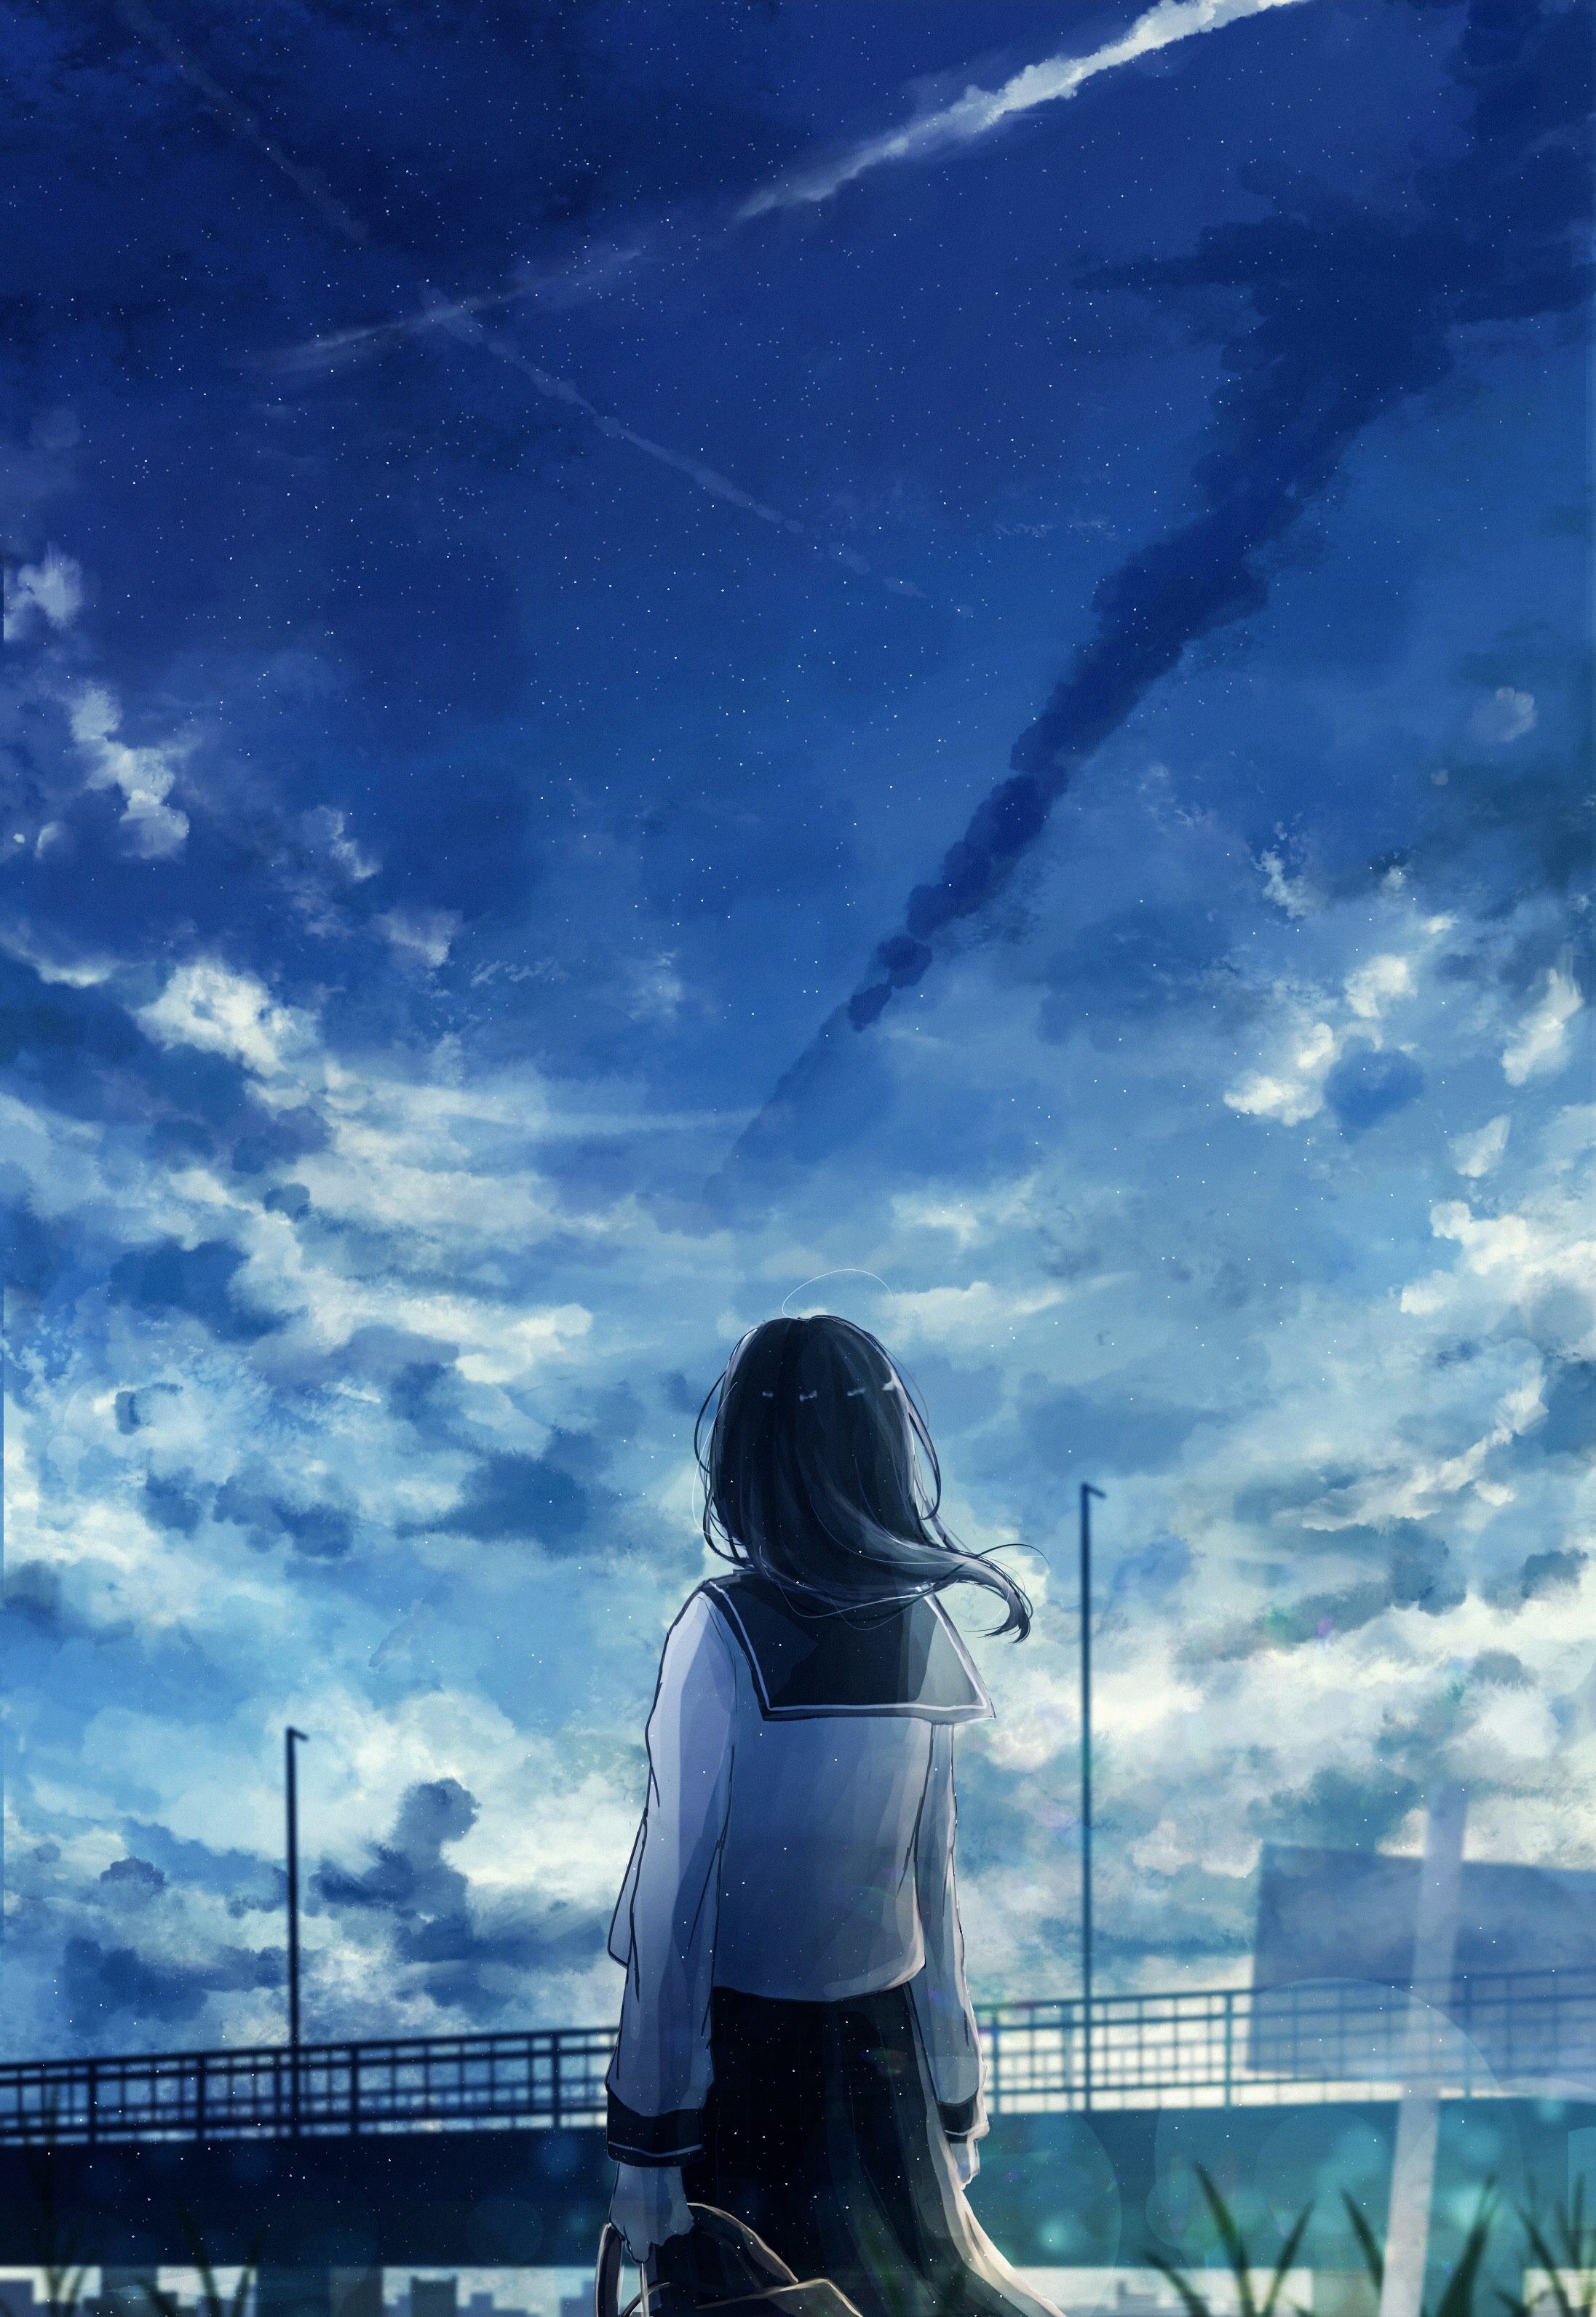 Download 800x1280 Anime Landscape, School Girl, Back View, Clouds Wallpaper for Galaxy Note, Samsung Galaxy Tab 2 10. Samsung Galaxy Tab 10. Galaxy Note 10. Asus Nexus 7